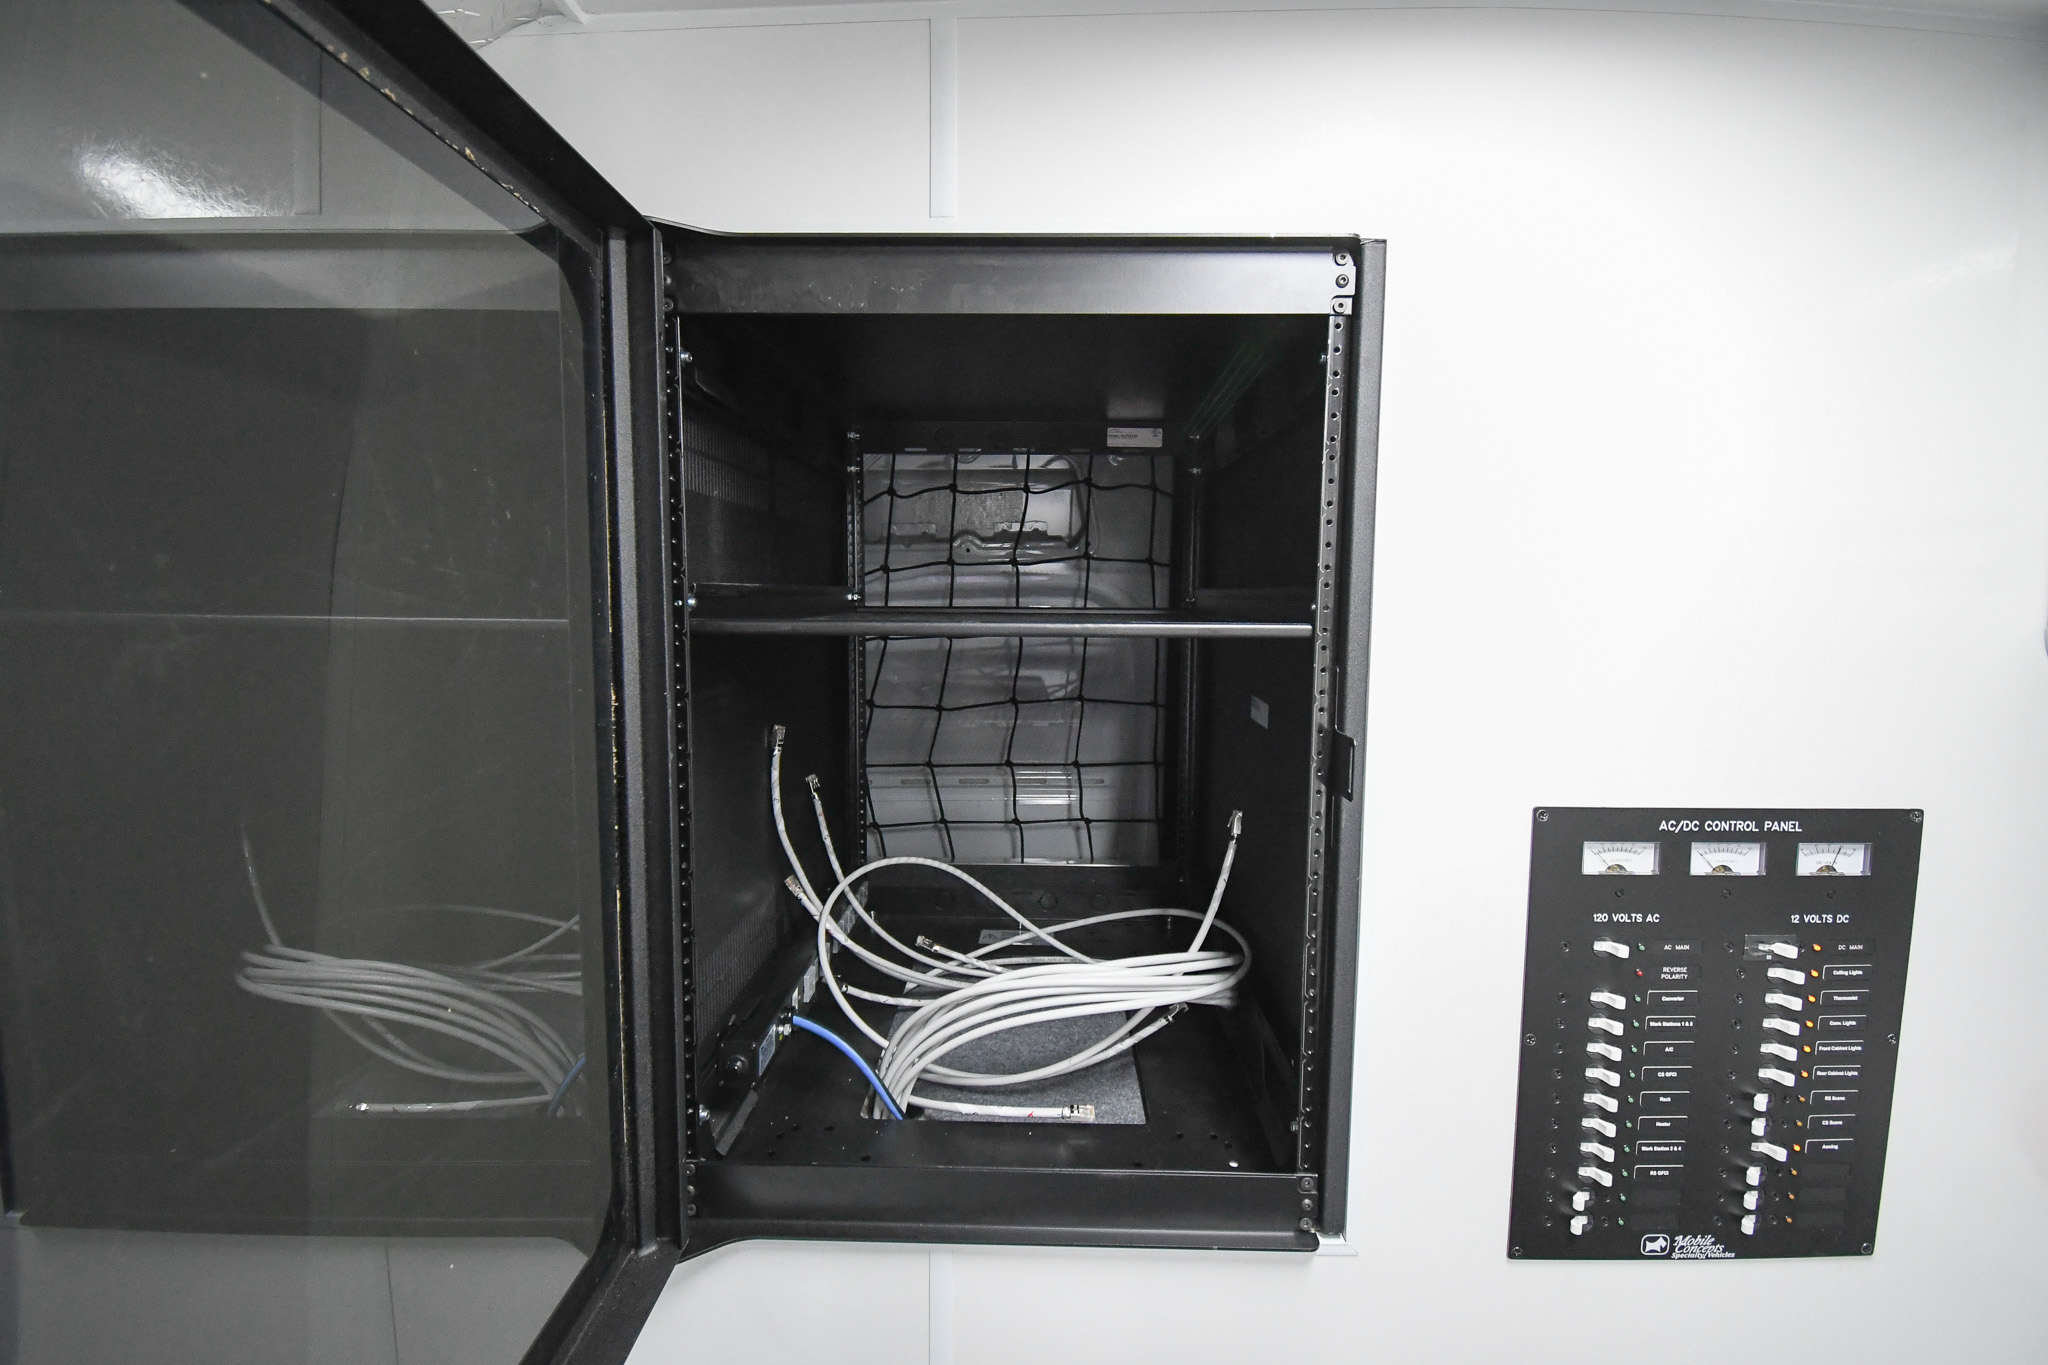 An interior view of the electrical rack cabinet inside the unit for Germantown, TN.